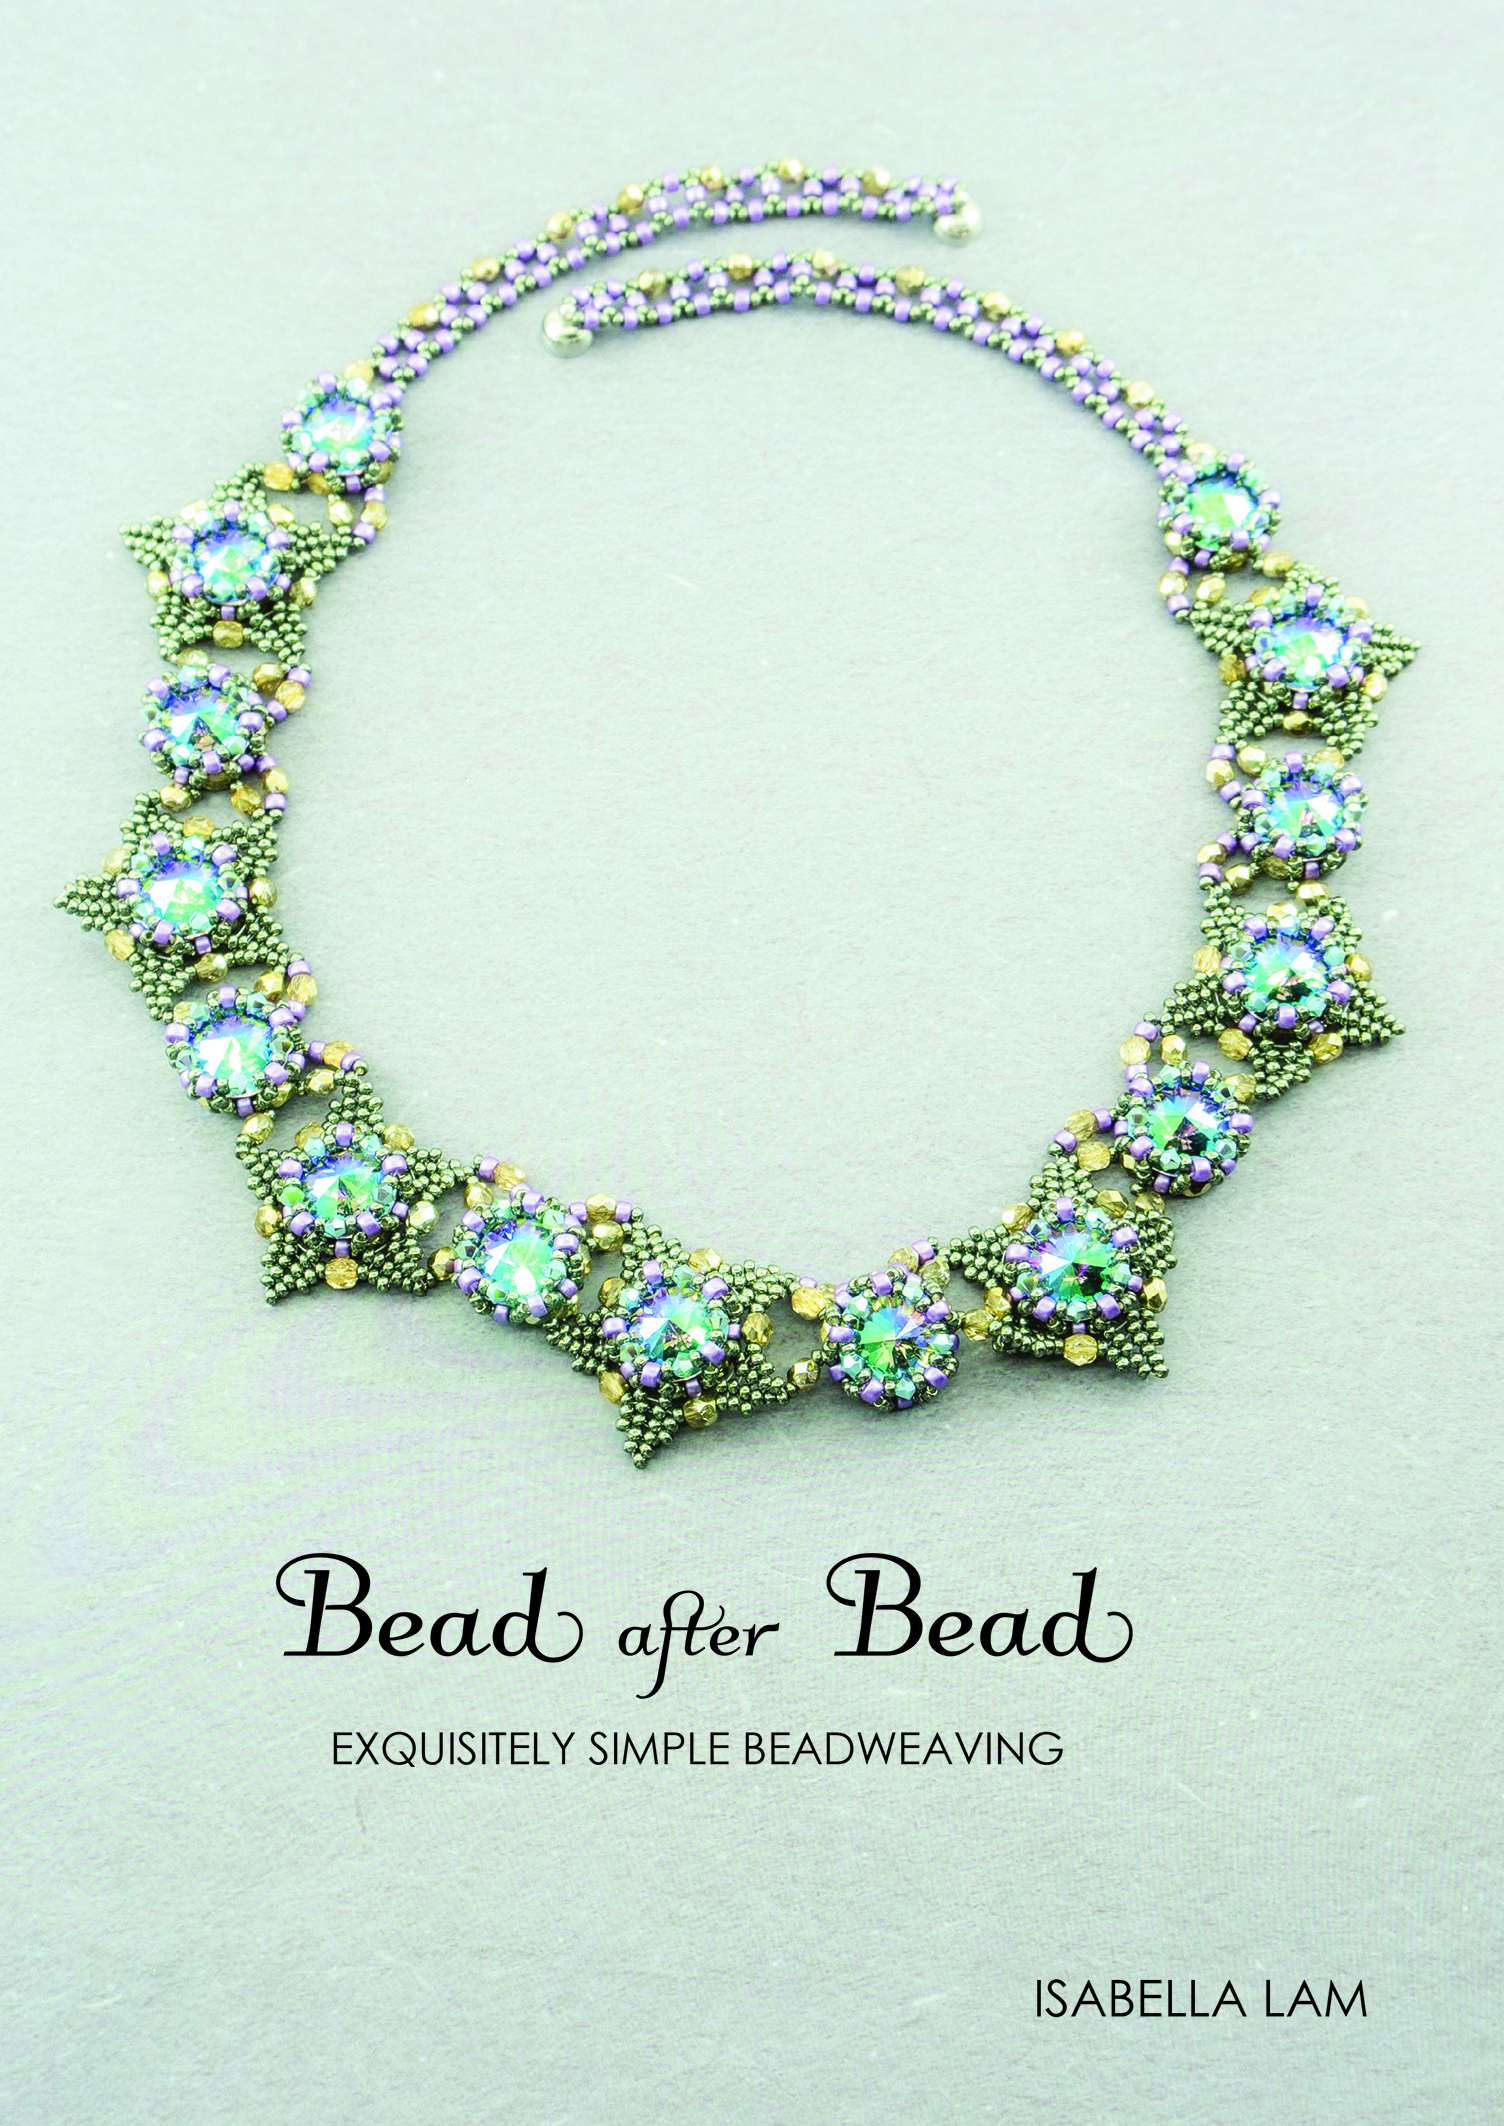 Books by Isabella Lam :: Bead after Bead - Digital & Printed copy